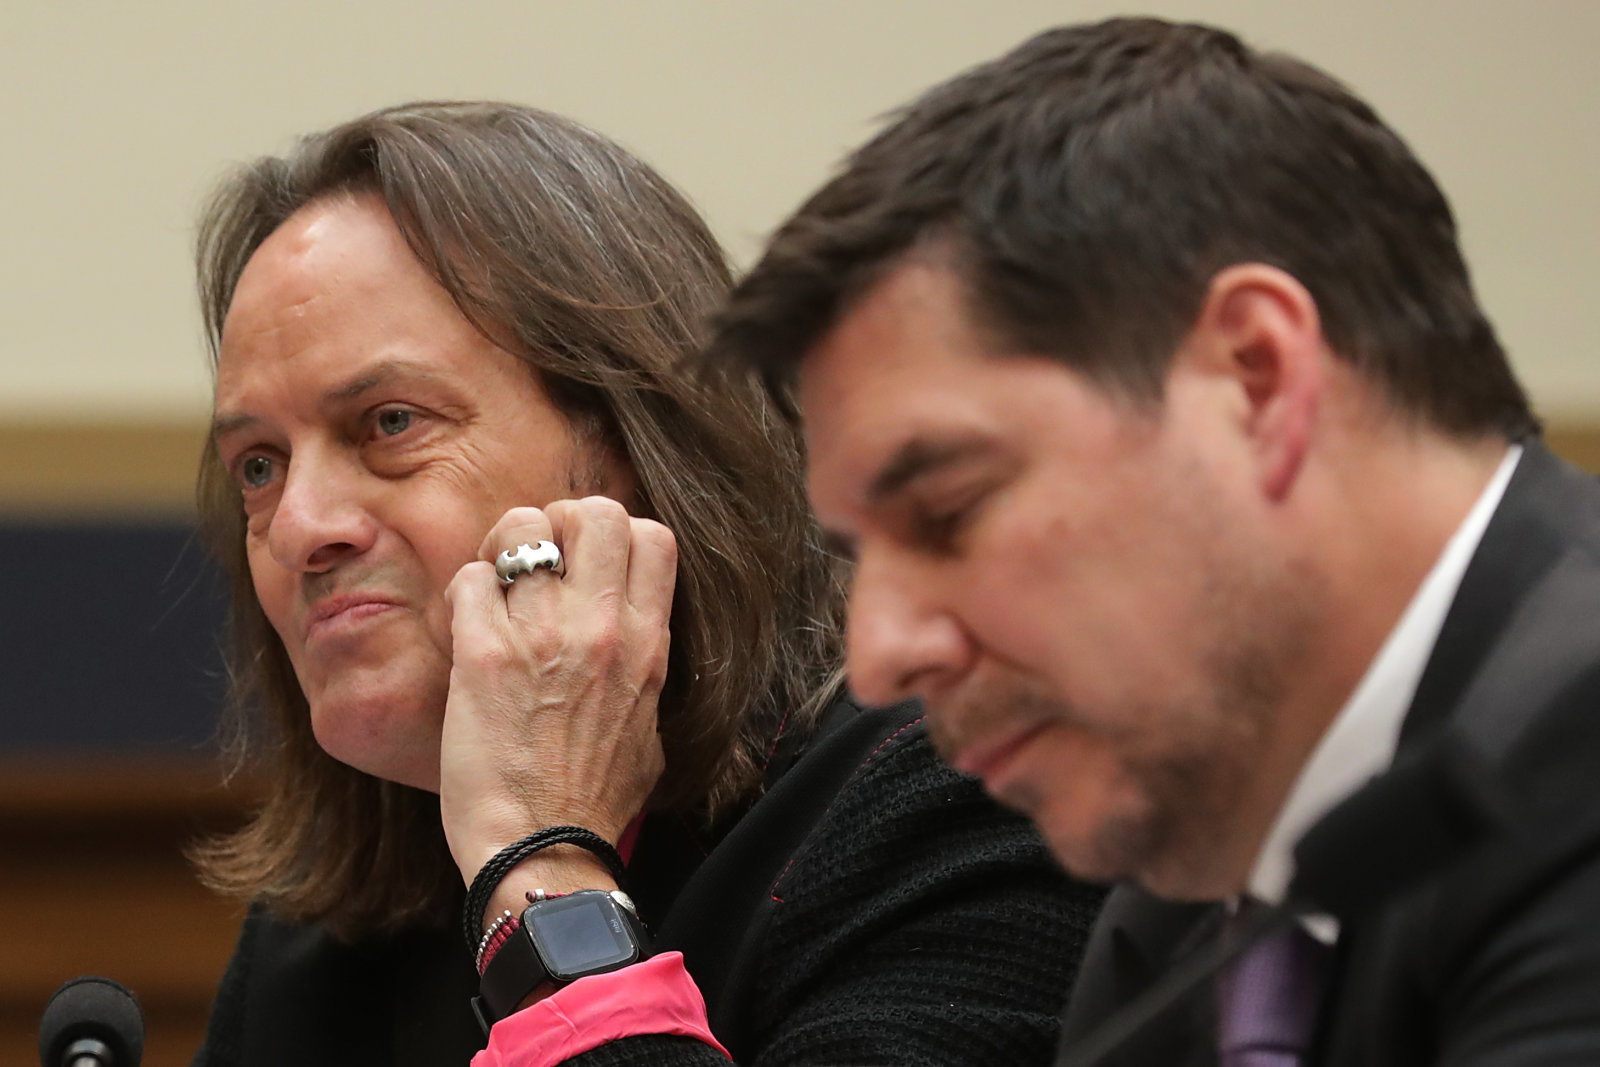 WASHINGTON, DC - MARCH 12:  T-Mobile CEO John Legere (L) and Sprint Executive Chairman Marcelo Claure testify before the House Judiciary Committee's Antitrust, Commercial and Administrative Law Subcommittee in the Rayburn House Office Building on Capitol Hill March 12, 2019 in Washington, DC. The corporate leaders and other experts testified about the "state of competition in the wireless market" and the possible impacts of the proposed merger of T-Mobile and Sprint would have on consumers in rural areas, workers and the future of 5G broadband internet access. (Photo by Chip Somodevilla/Getty Images)